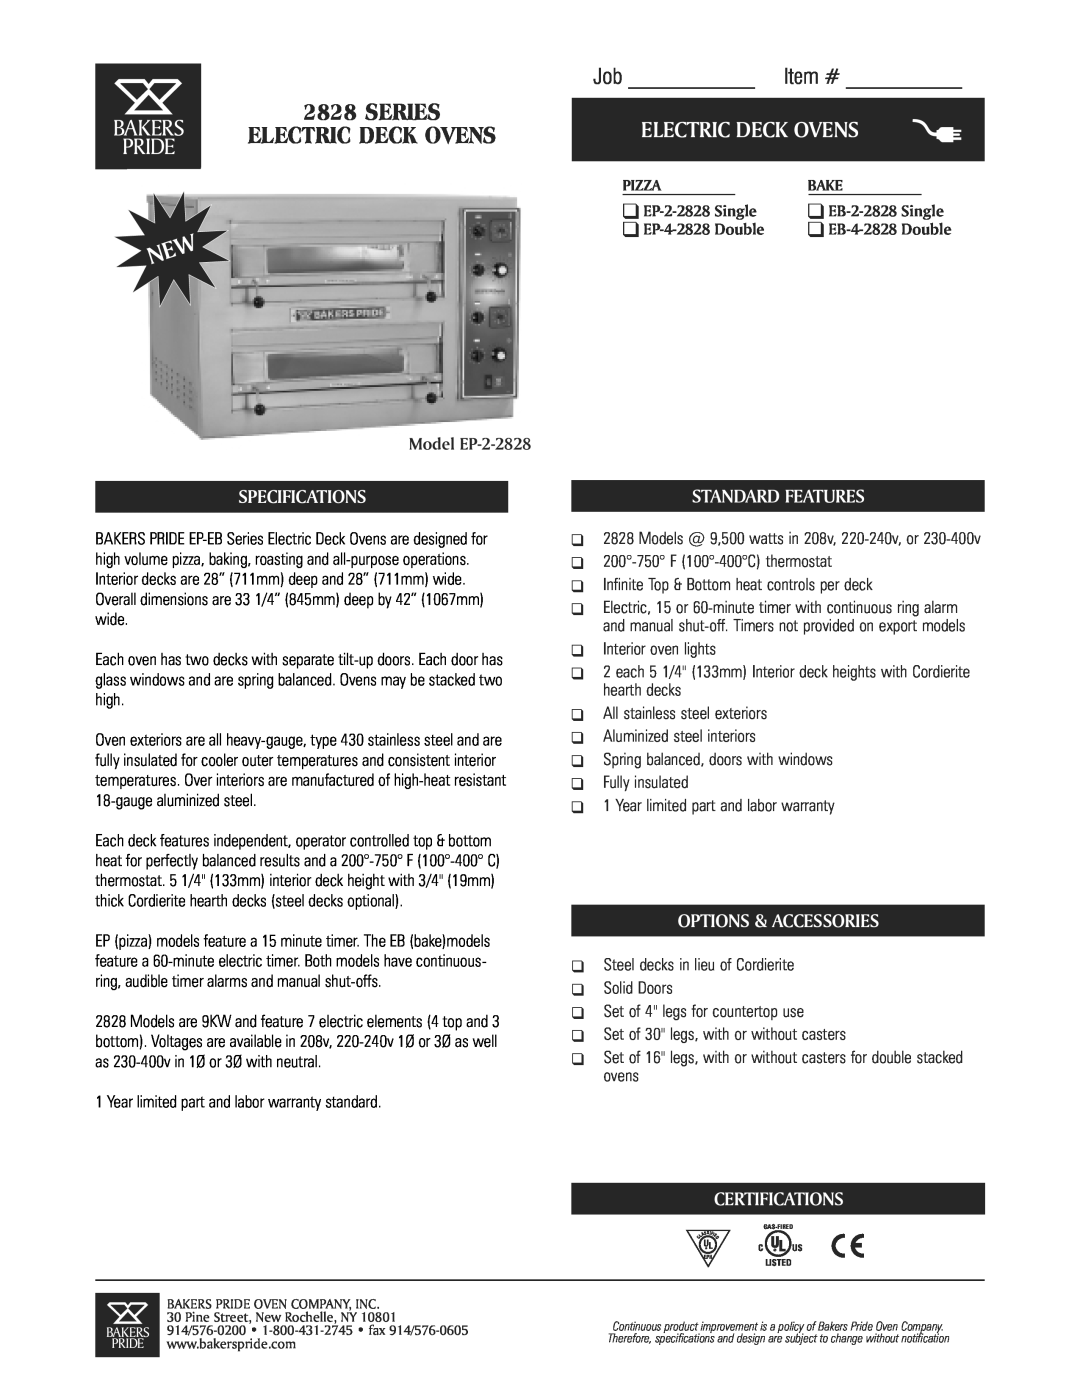 Bakers Pride Oven EB-2-2828, EP-4-2828 specifications Series Bakers Electric Deck Ovens Pride, Job, Item #, Specifications 